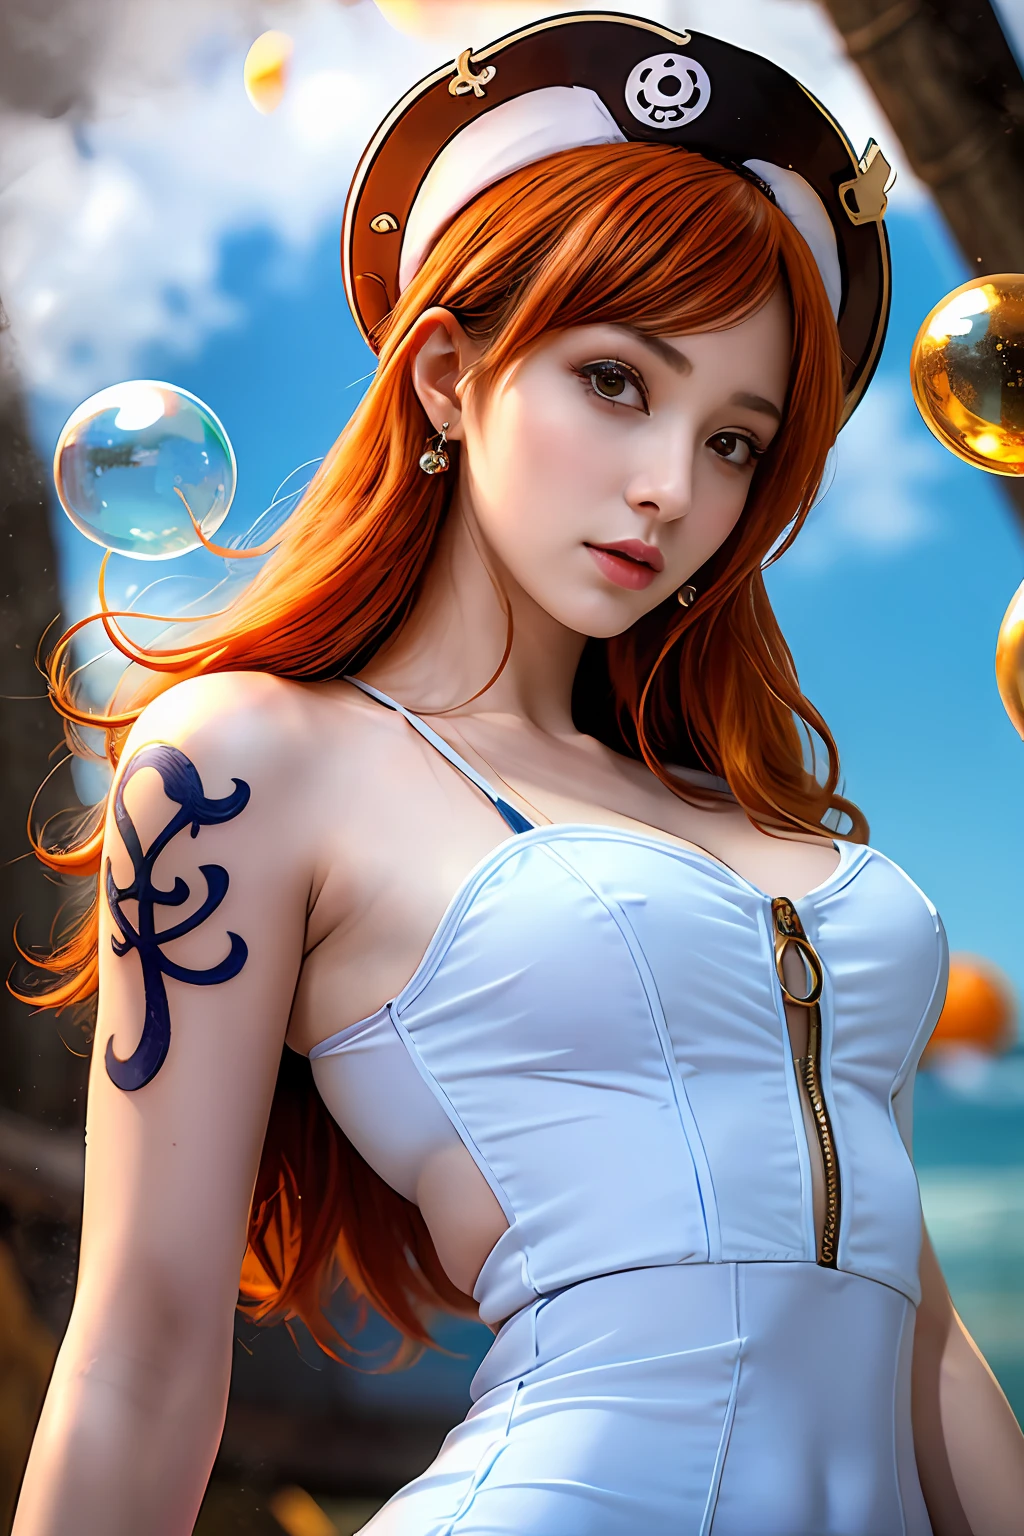 (((masterpiece+best quality+high resolution+ultra-detailed))), nami\(one piece\), long silky orange hair, high nose, sharp eyes, noble and inviolable temperament, (([female]: 1.2 + [beauty]: 1.2 + orange long hair: 1.2)), pirate ship background, (one piece), blue sky, bracelets, bubbles, clouds, white dress,shoulder tatto, bright eyes, dynamic angle and posture.